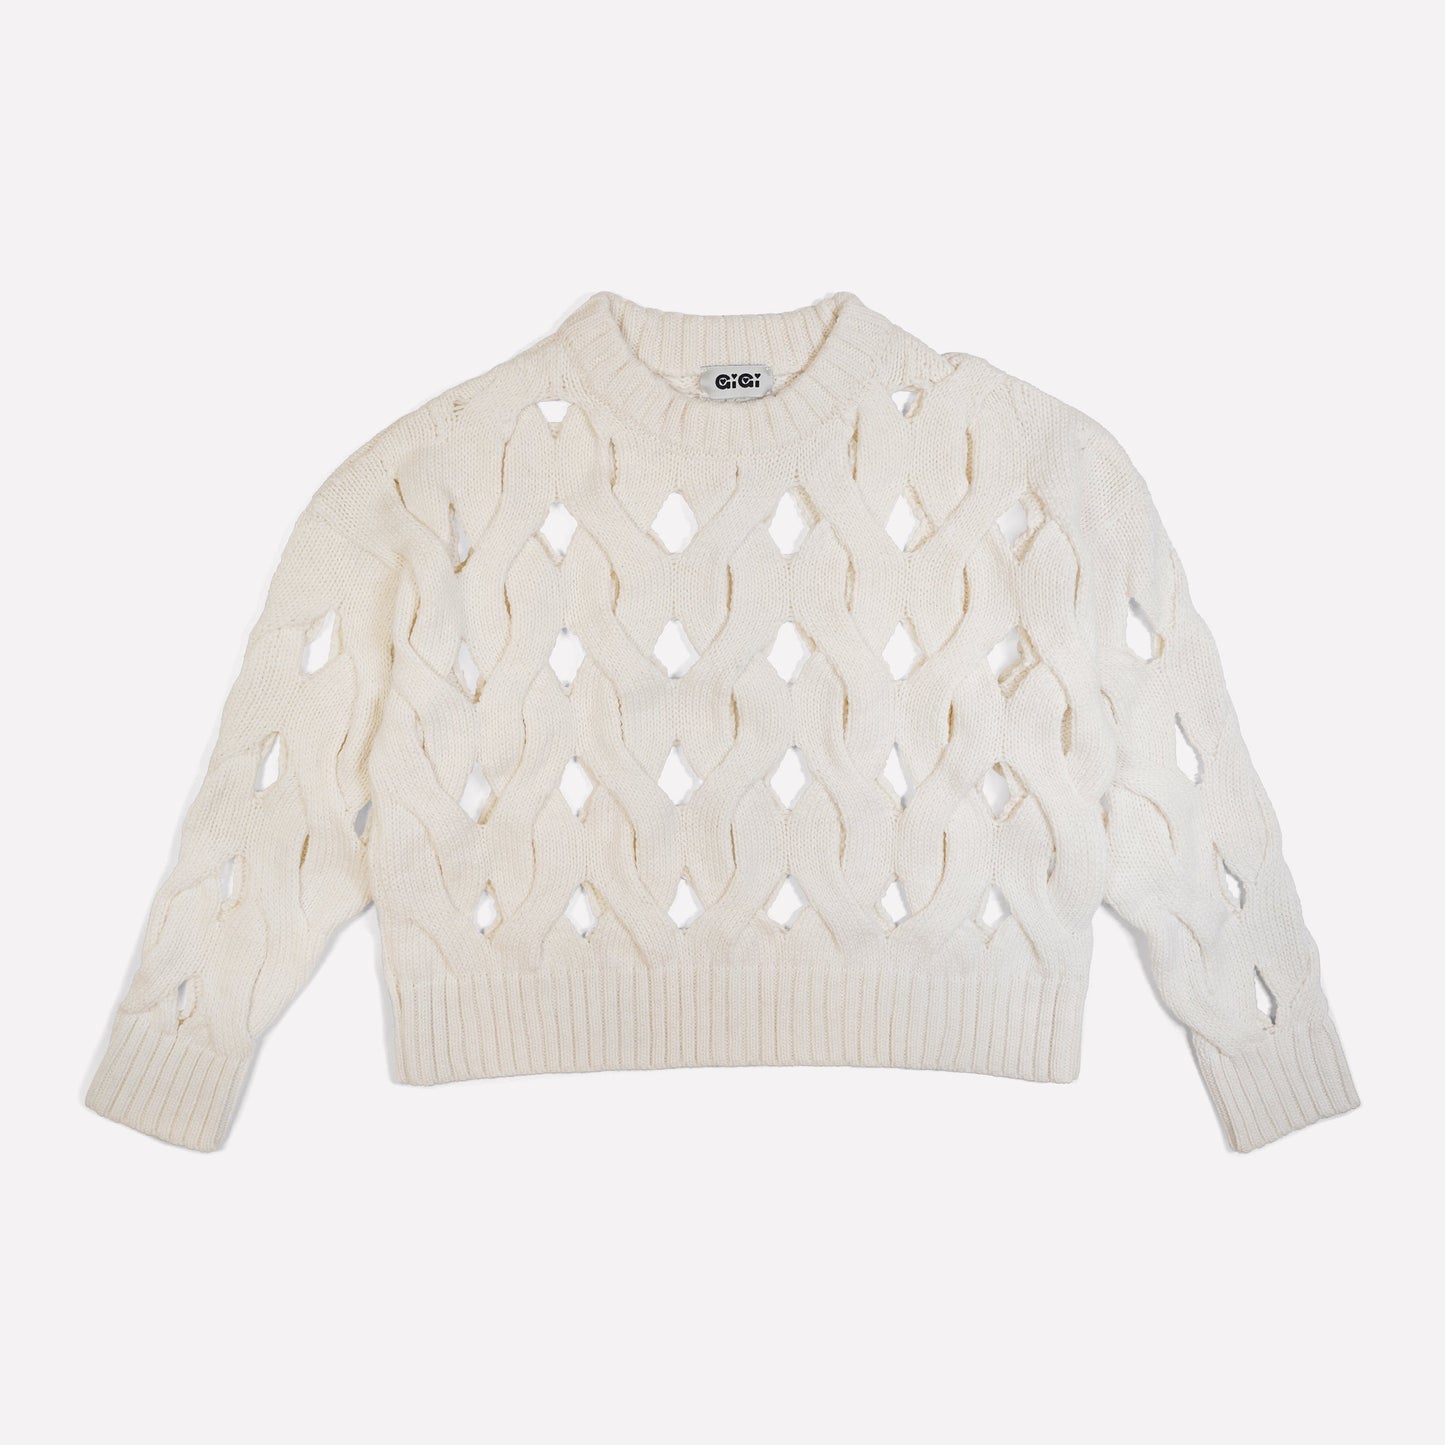 Gigi Knitwear Open cable sweater in ivory